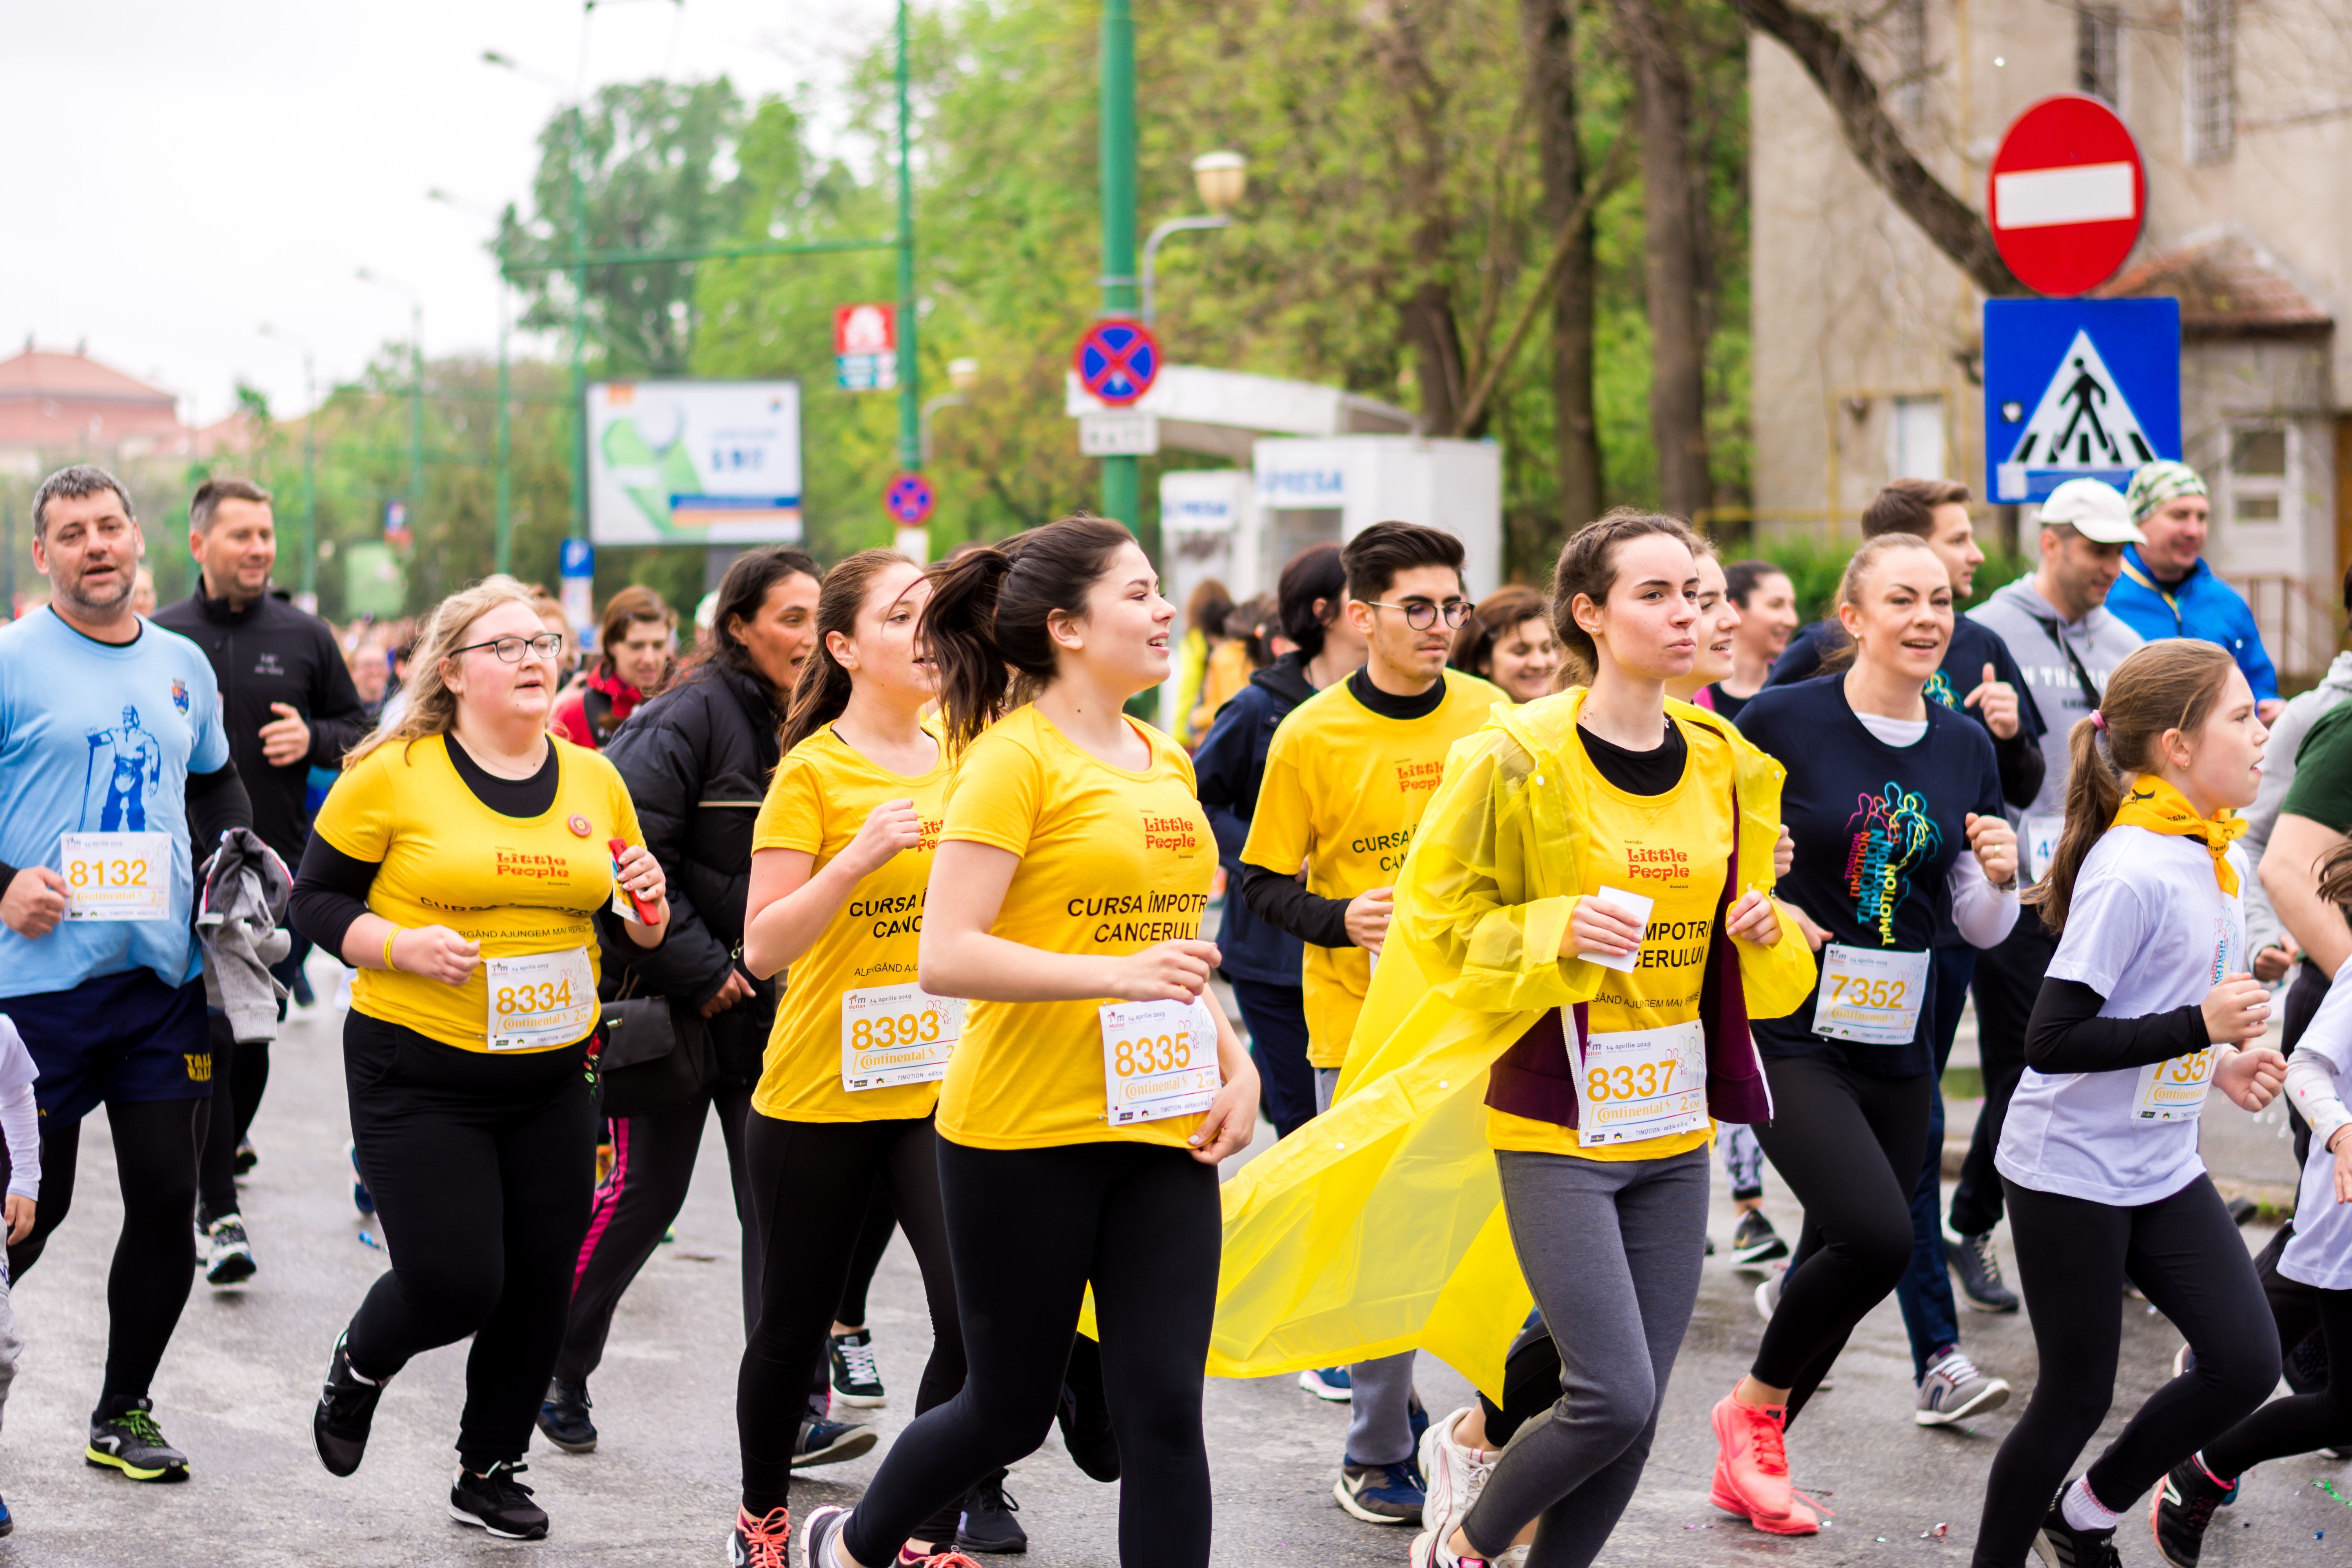 People taking part in a charity run